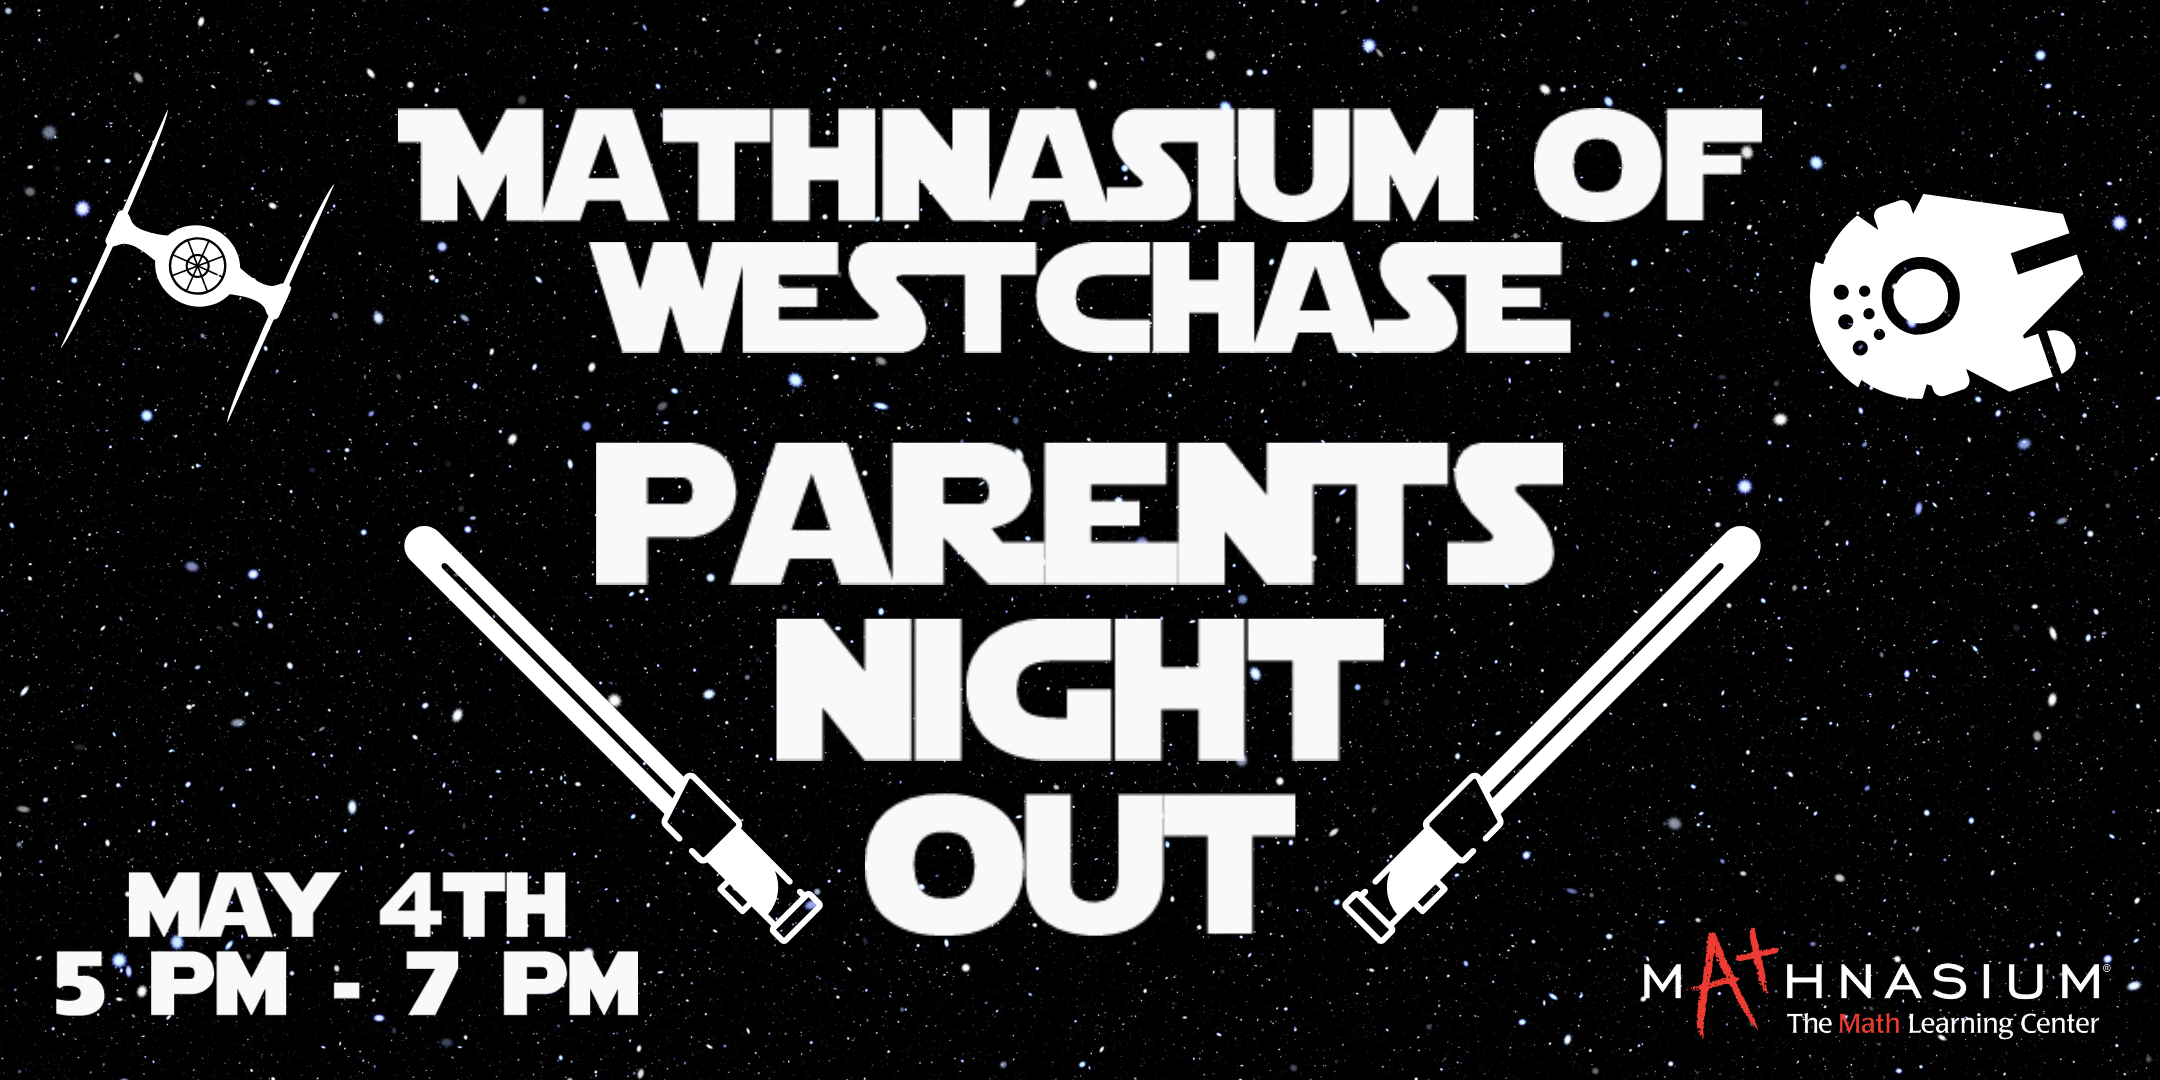 Parents Night Out - May the 4th be with you